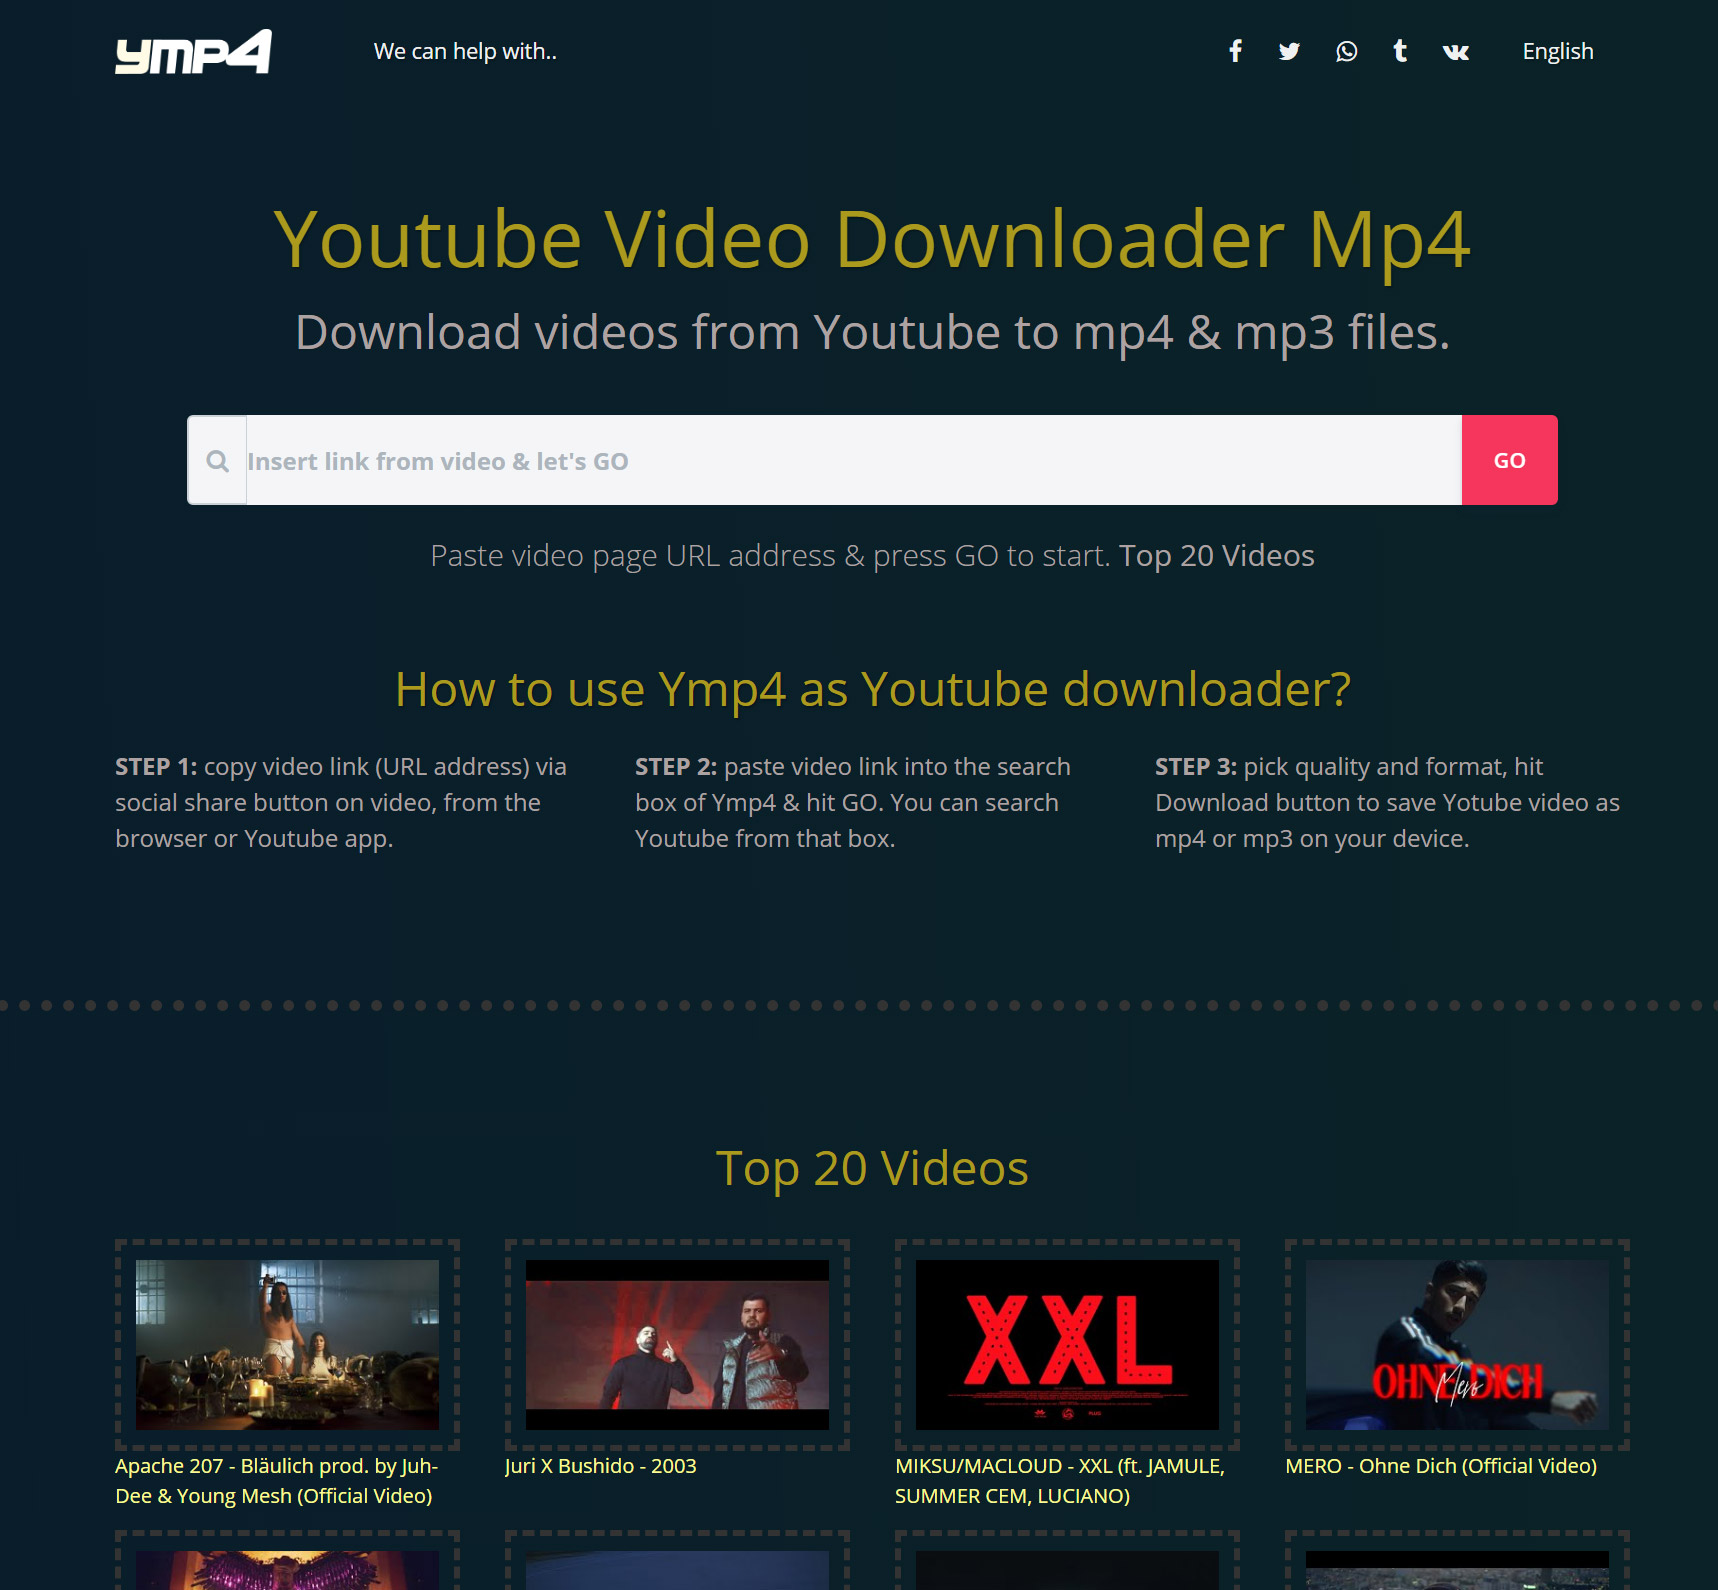 youtube mp4 download 4k